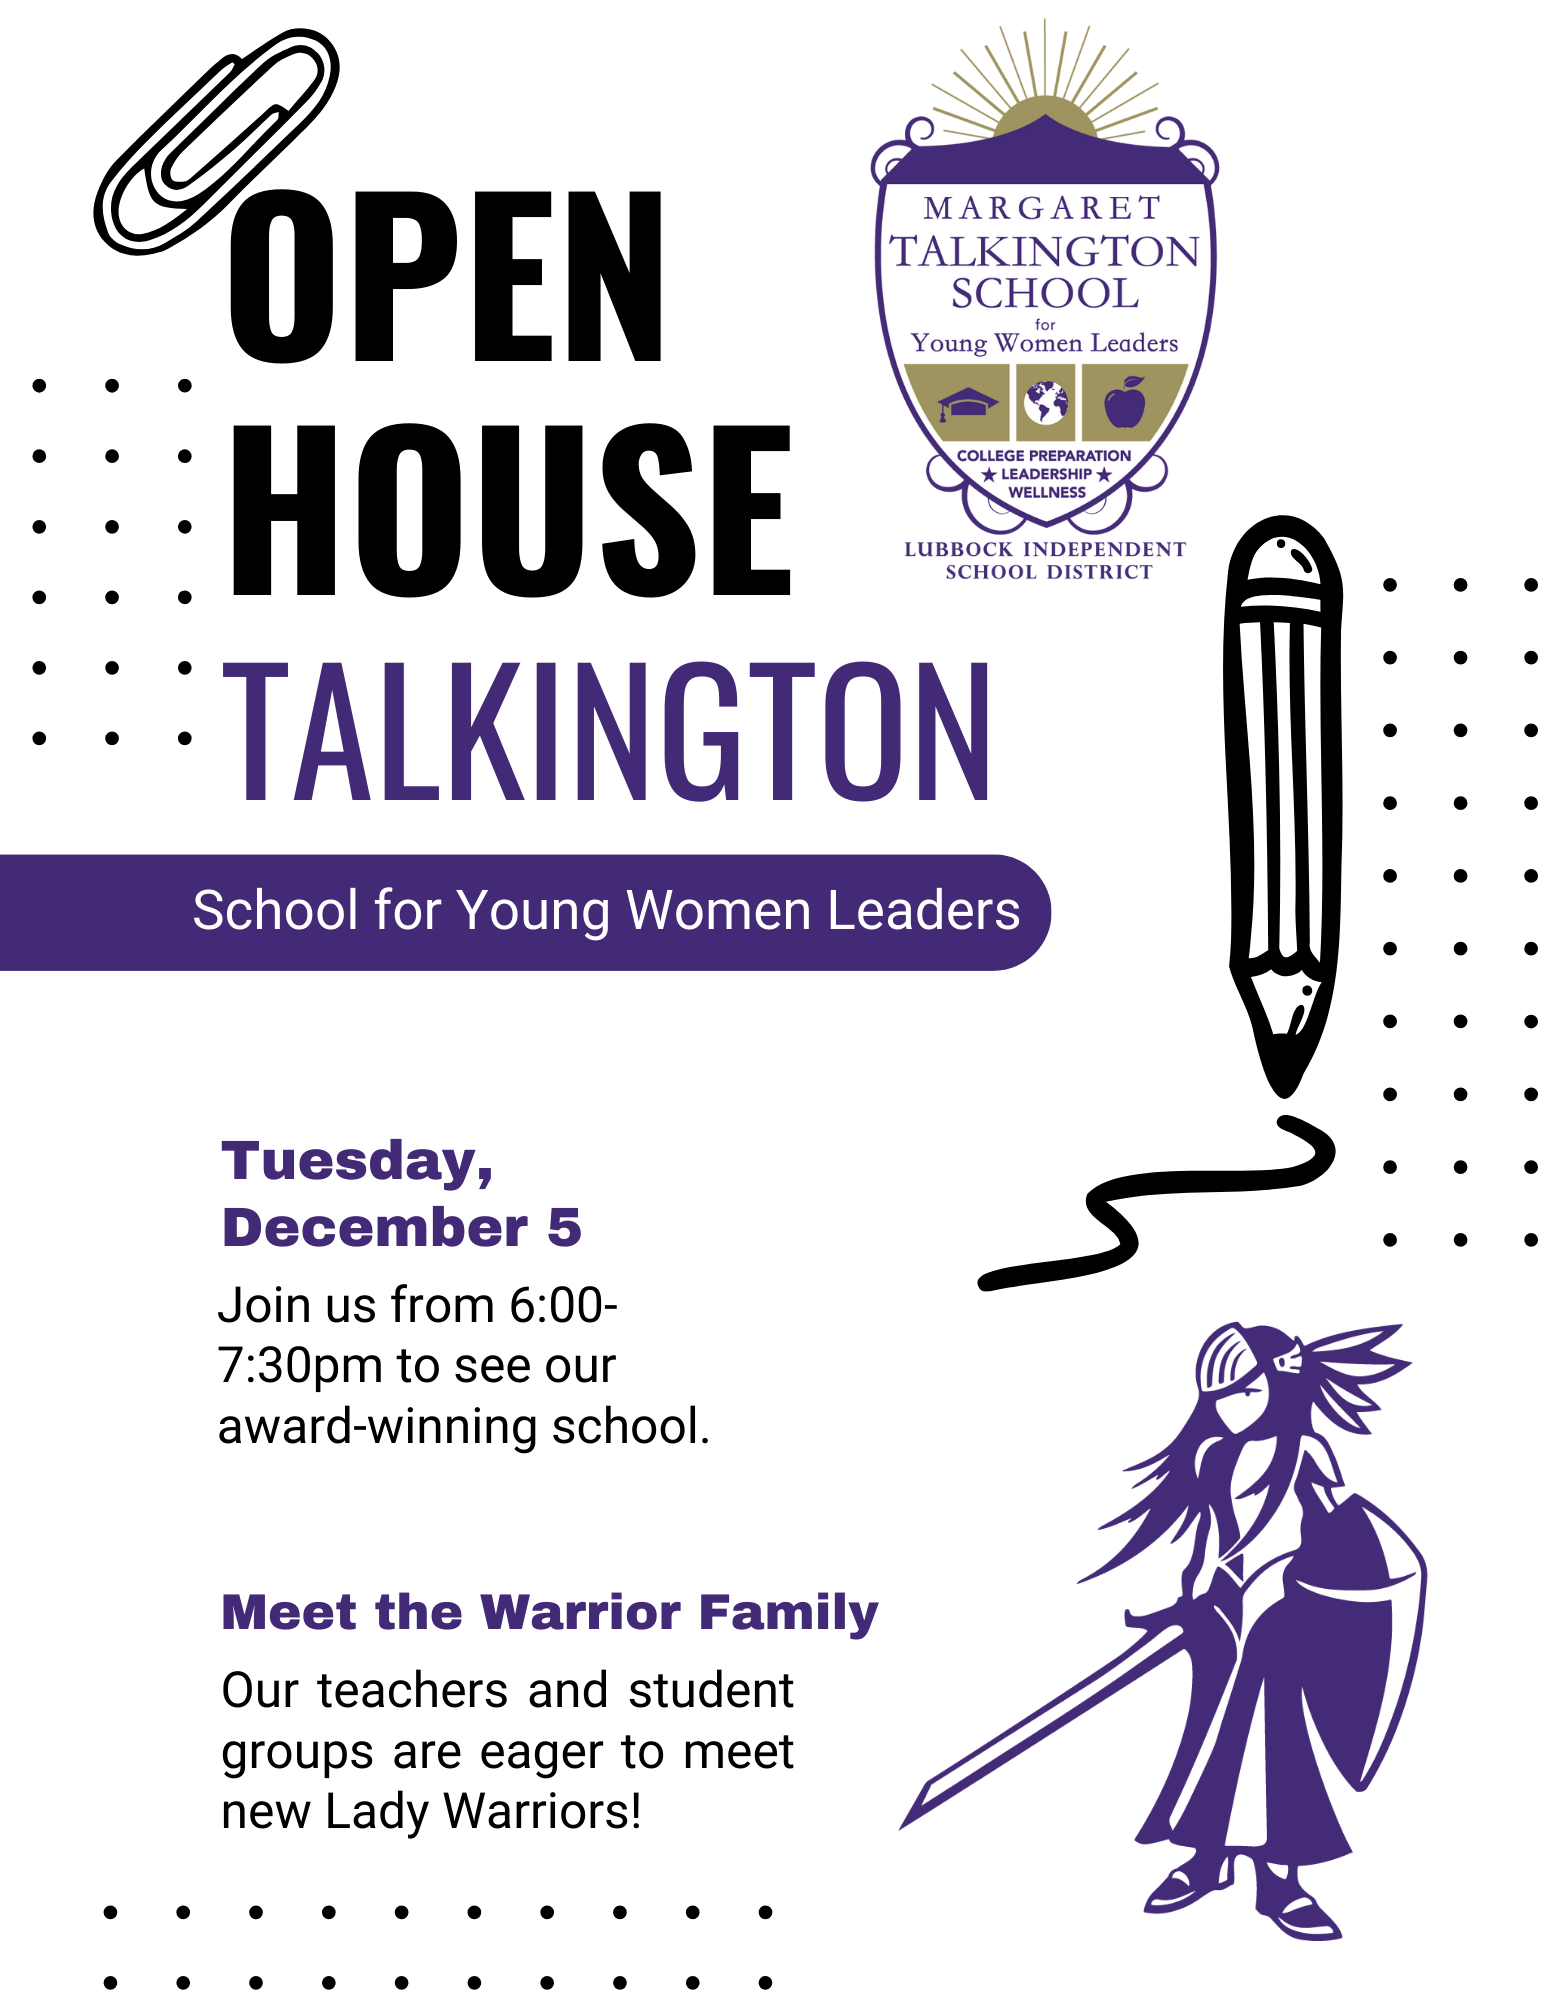 Open House flyer with Logo (Dec 5 from 6:00-7:30pm)